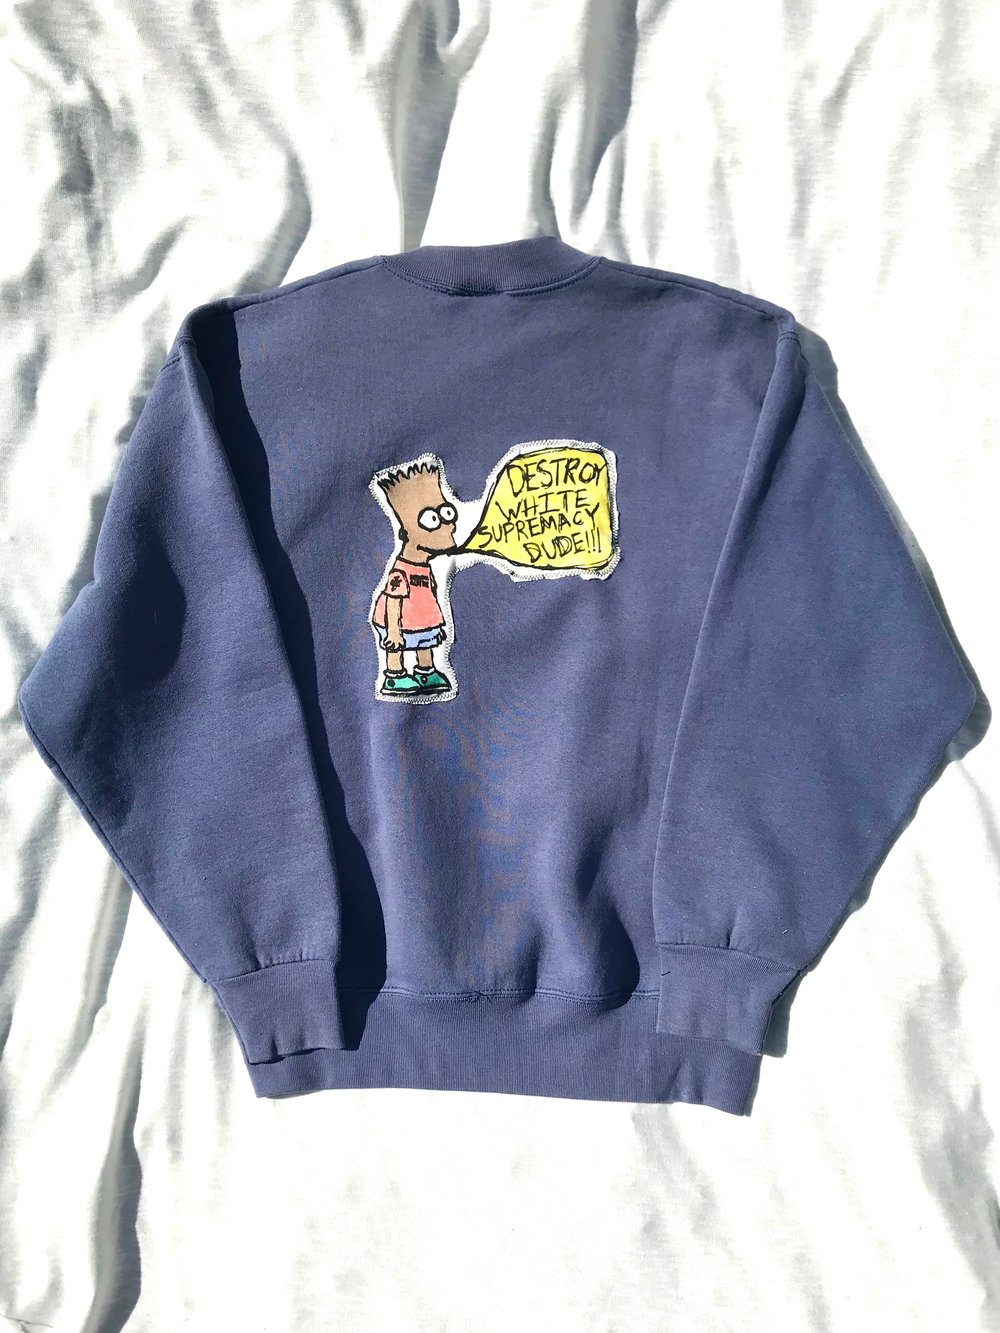 DWS dude hand painted sweater in blue 